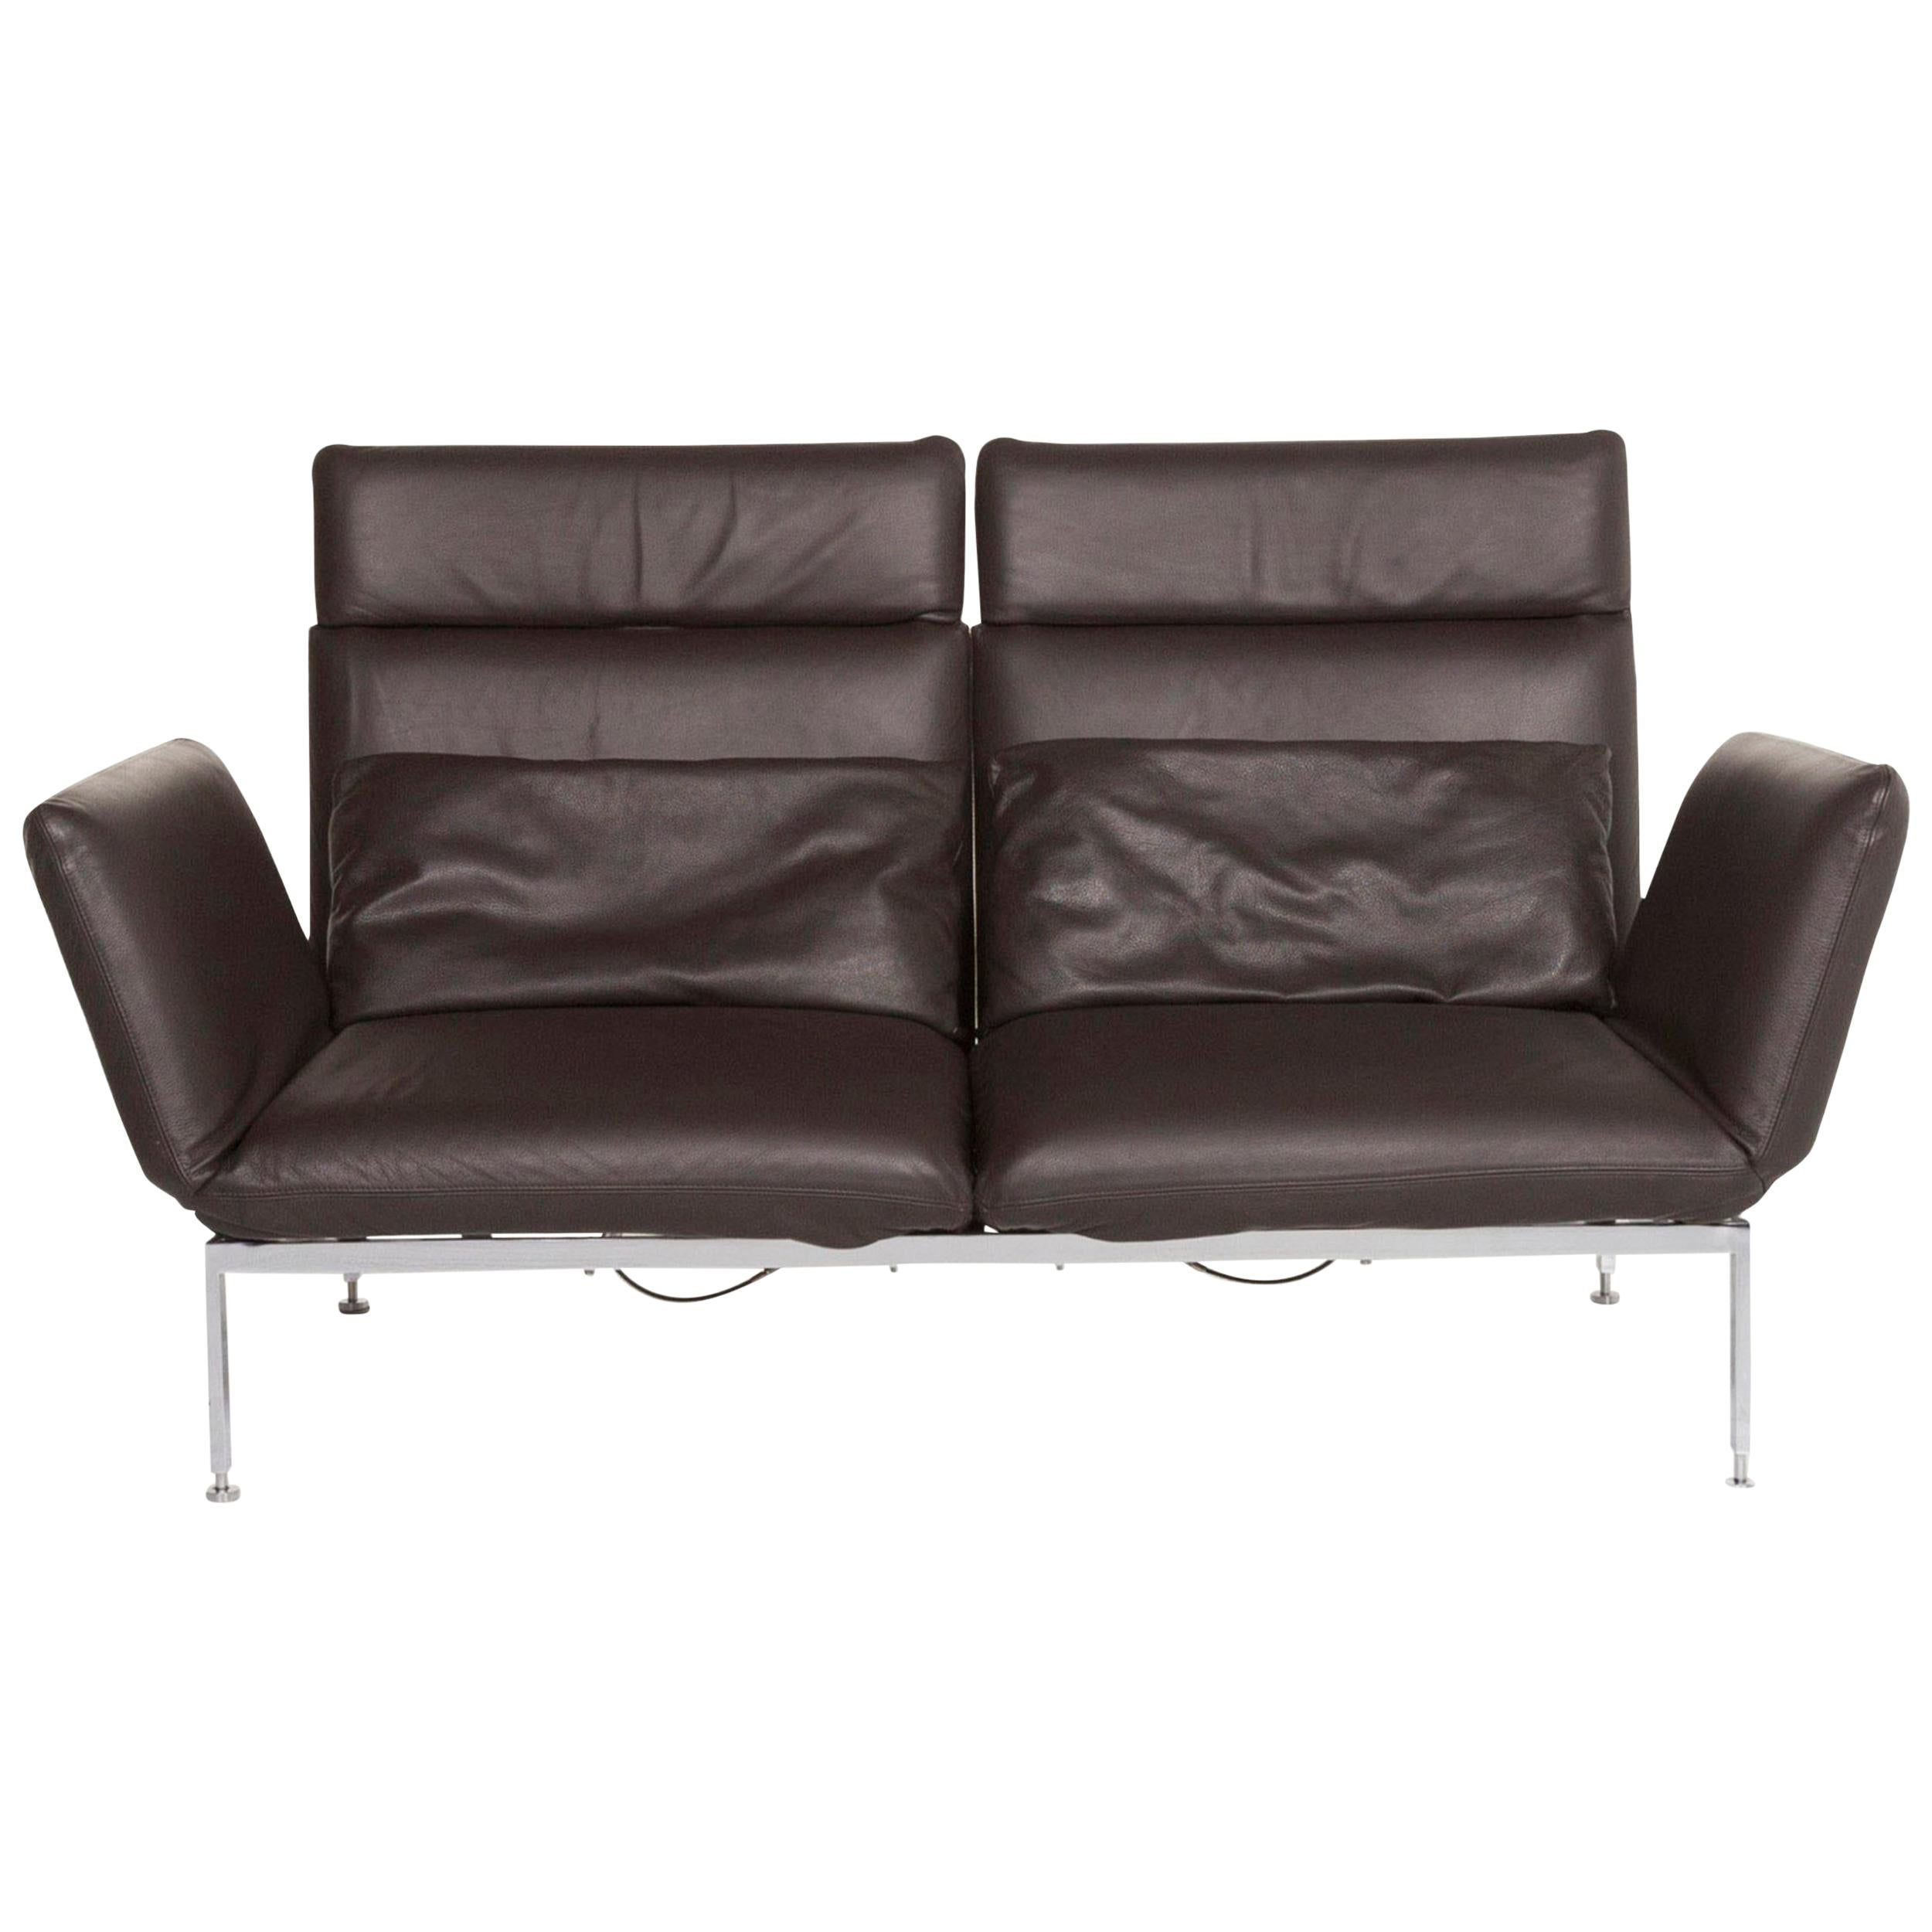 Brühl & Sippold Roro Leather Sofa Brown Dark Brown Three-Seat Function Relax For Sale